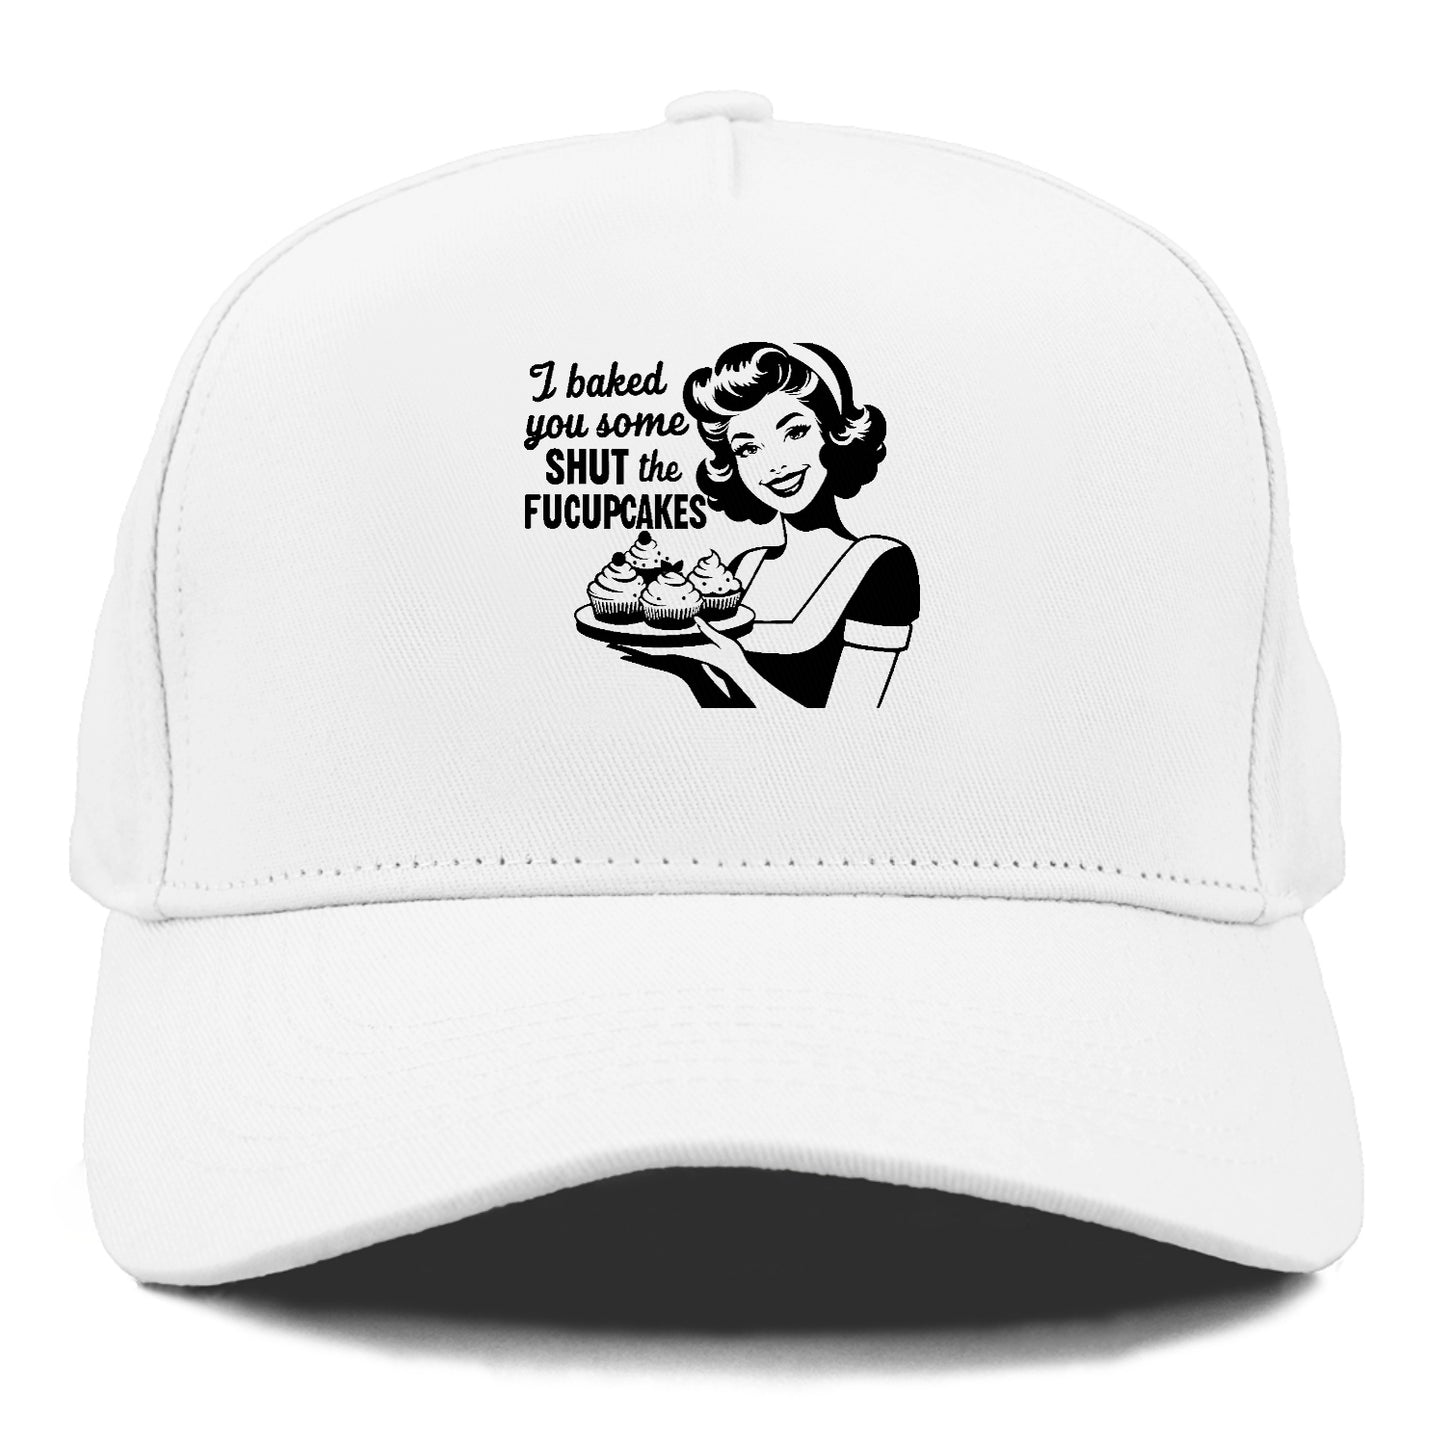 i baked you some shut the fucupcakes!! Hat